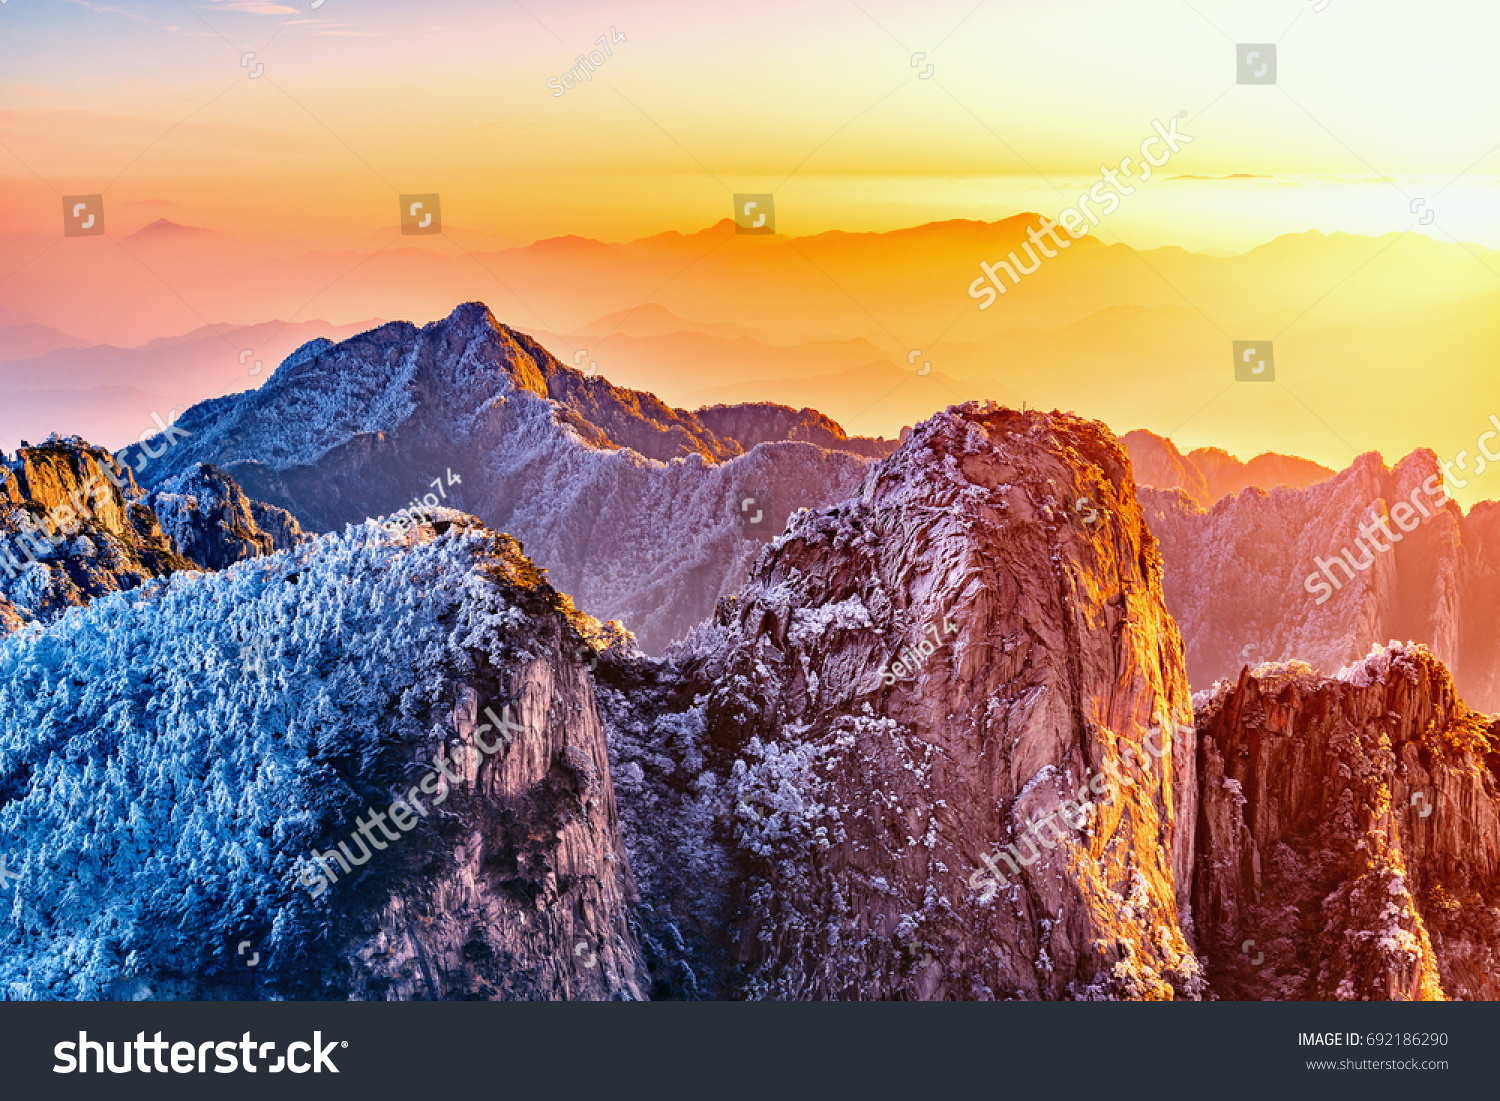 Morning view of the peaks of Huangshan National park. China. #692186290